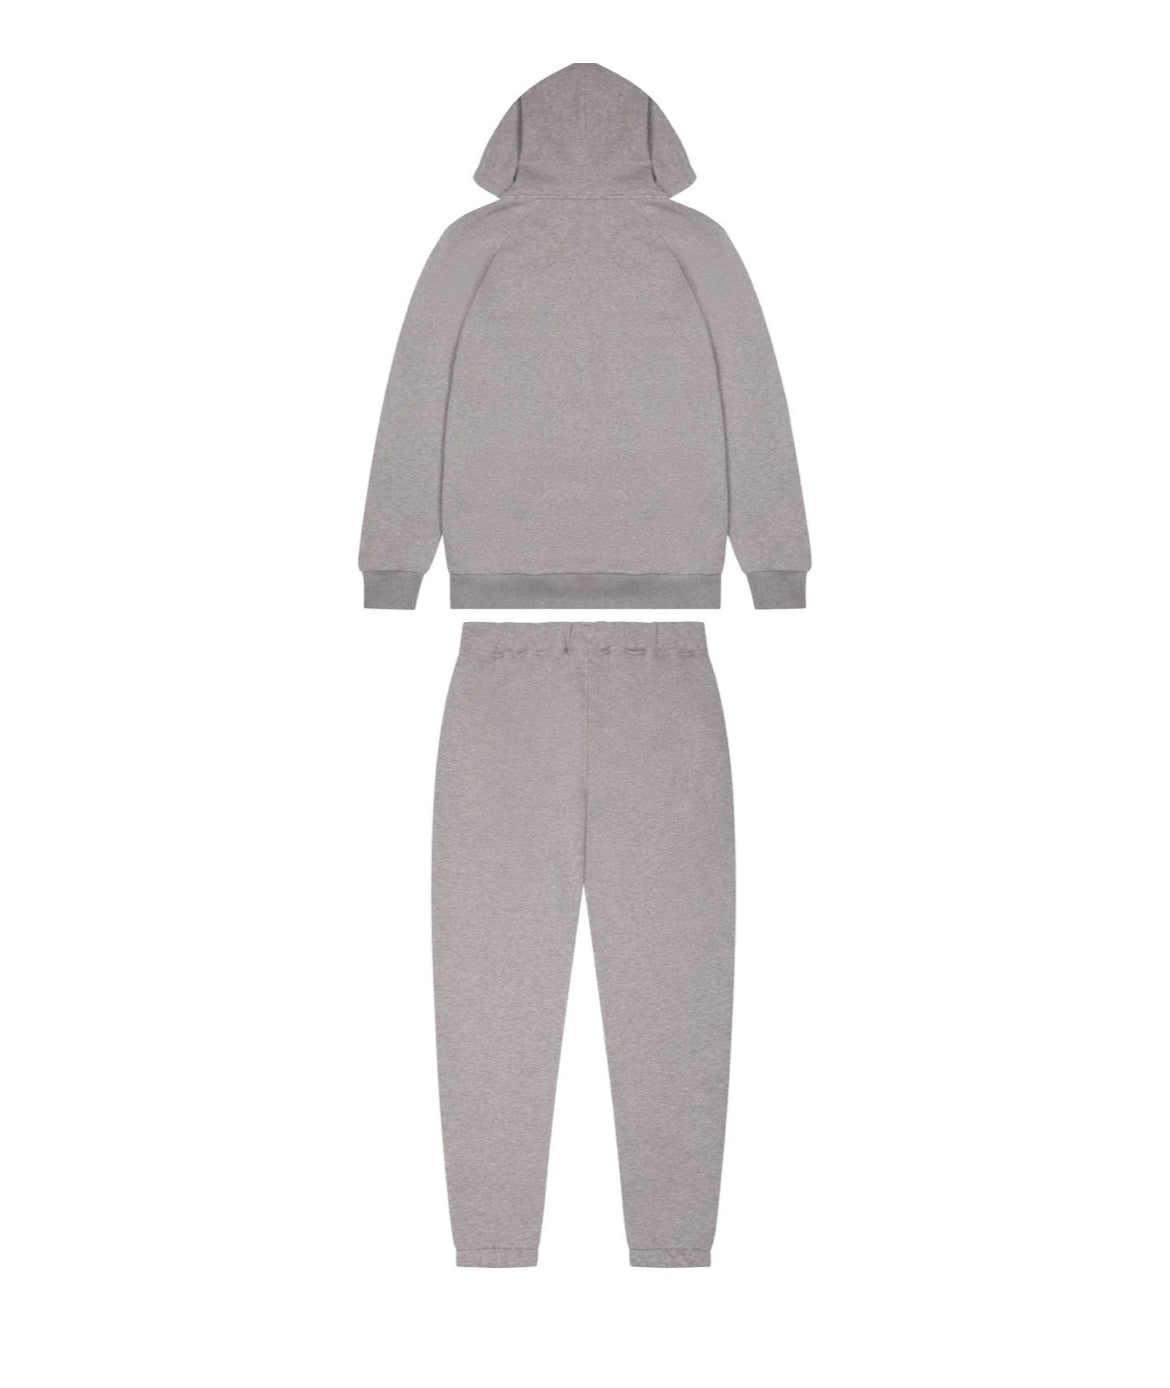 Trapstar Shooters Tracksuit - GREY / SKY BLUE (FAST DELIVERY)